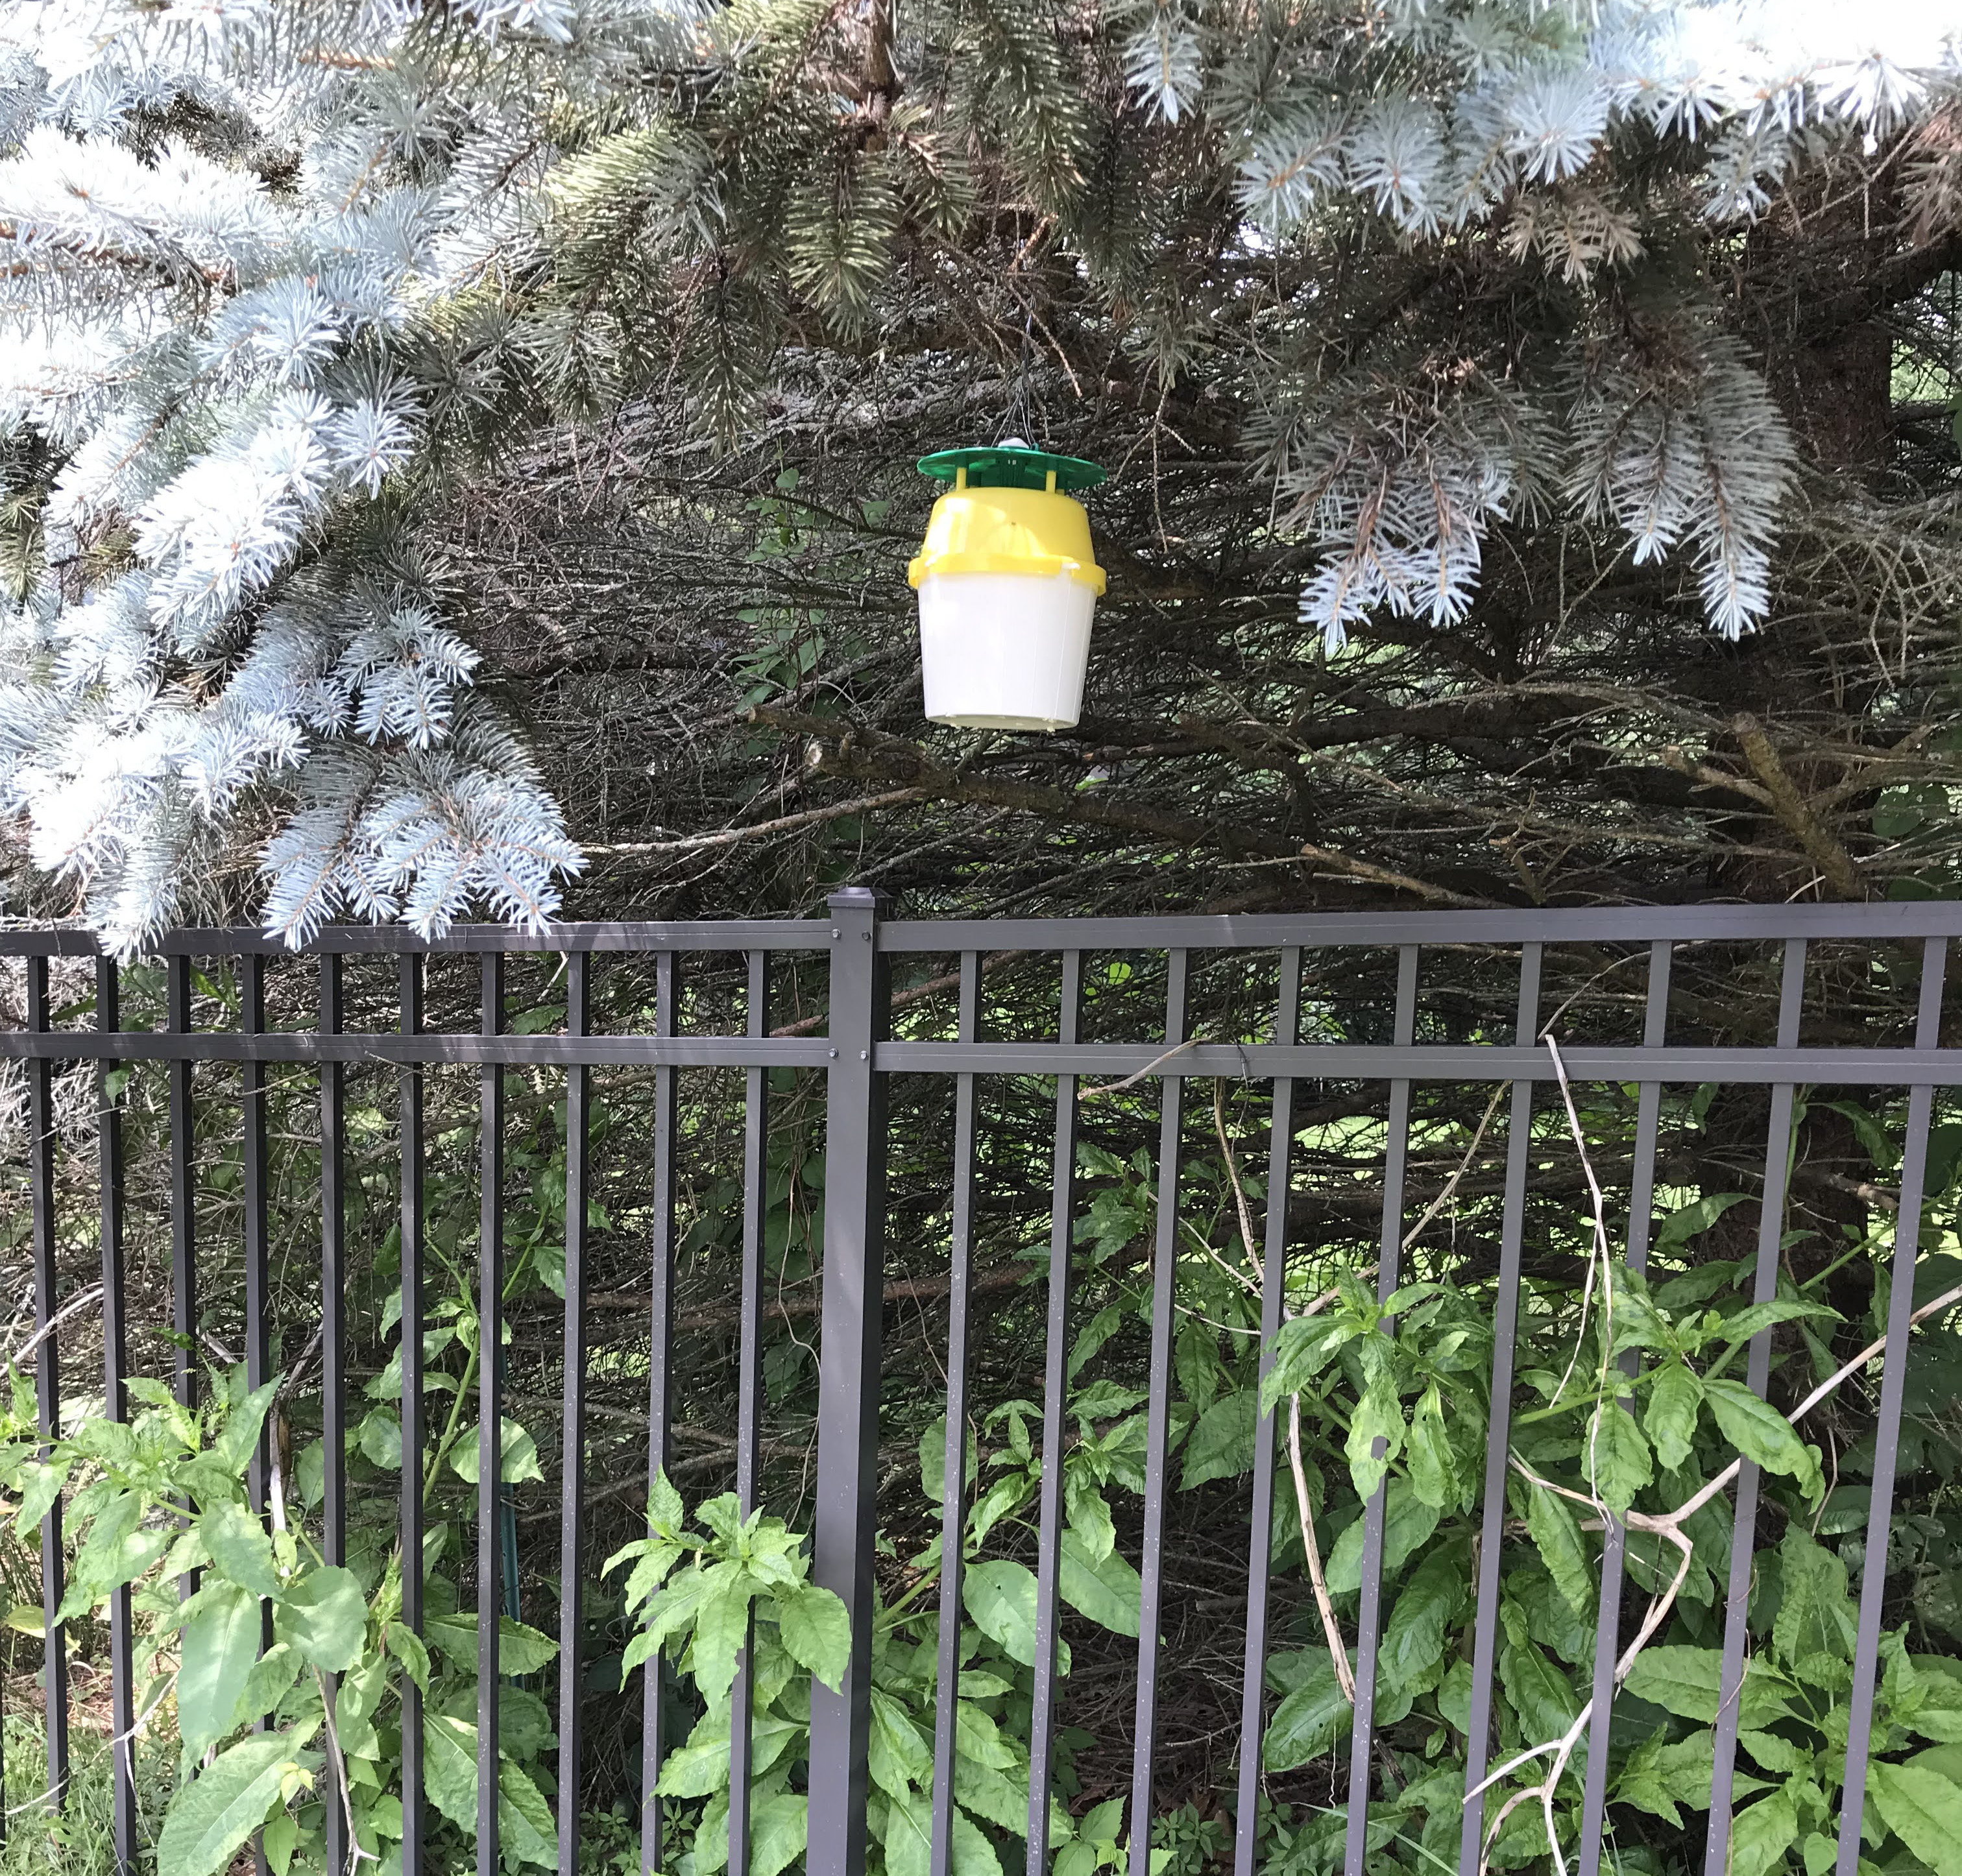 A yellow bucket trap hanging from a tree.